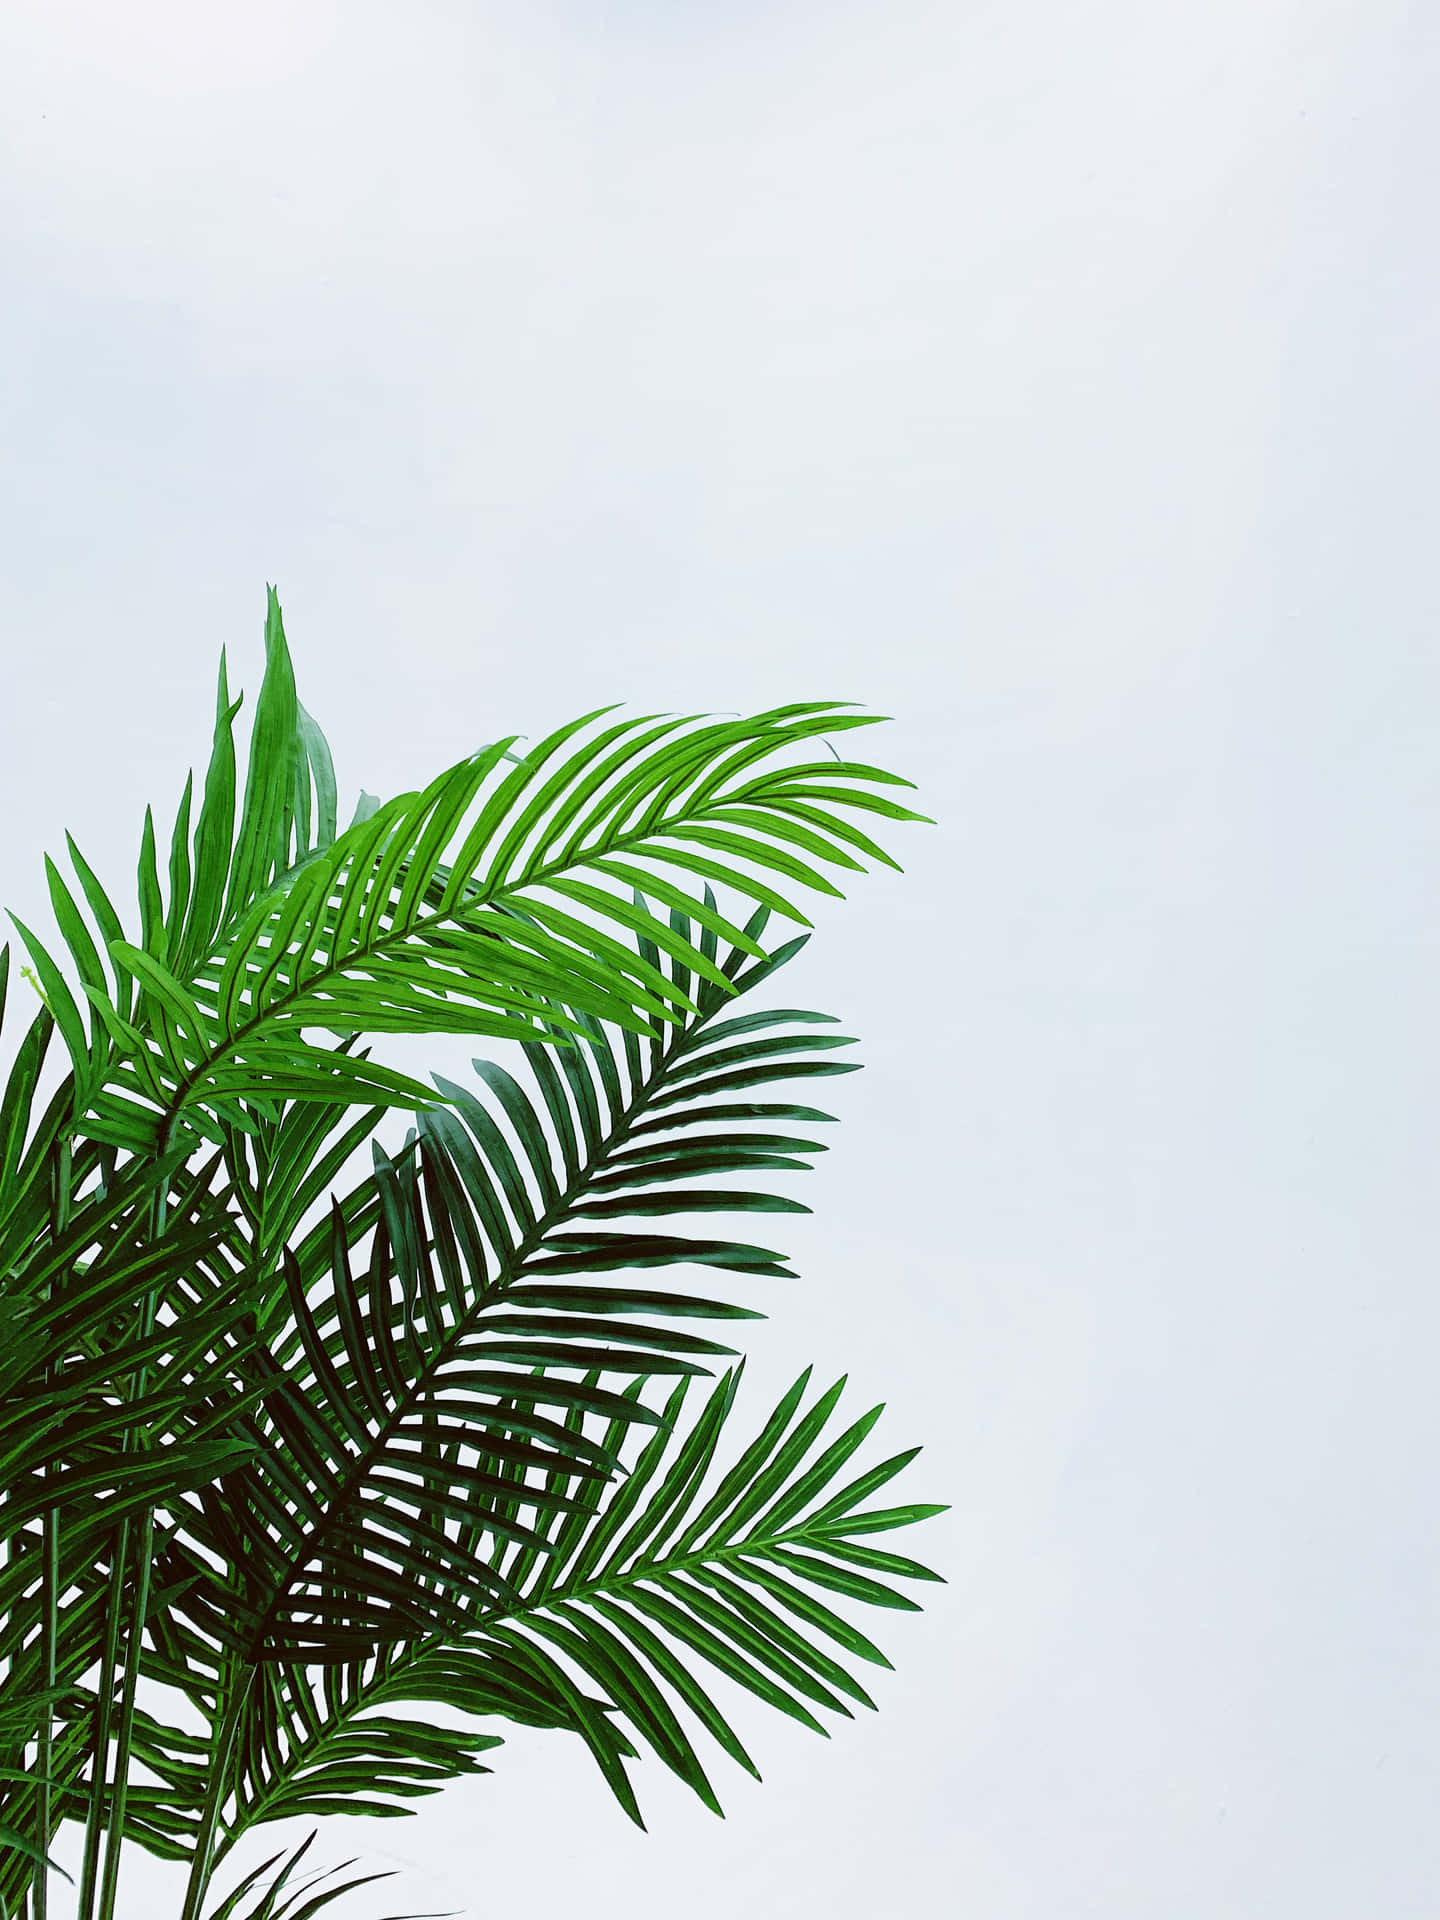 A view of bright, green palm leaves against a stunning blue sky.